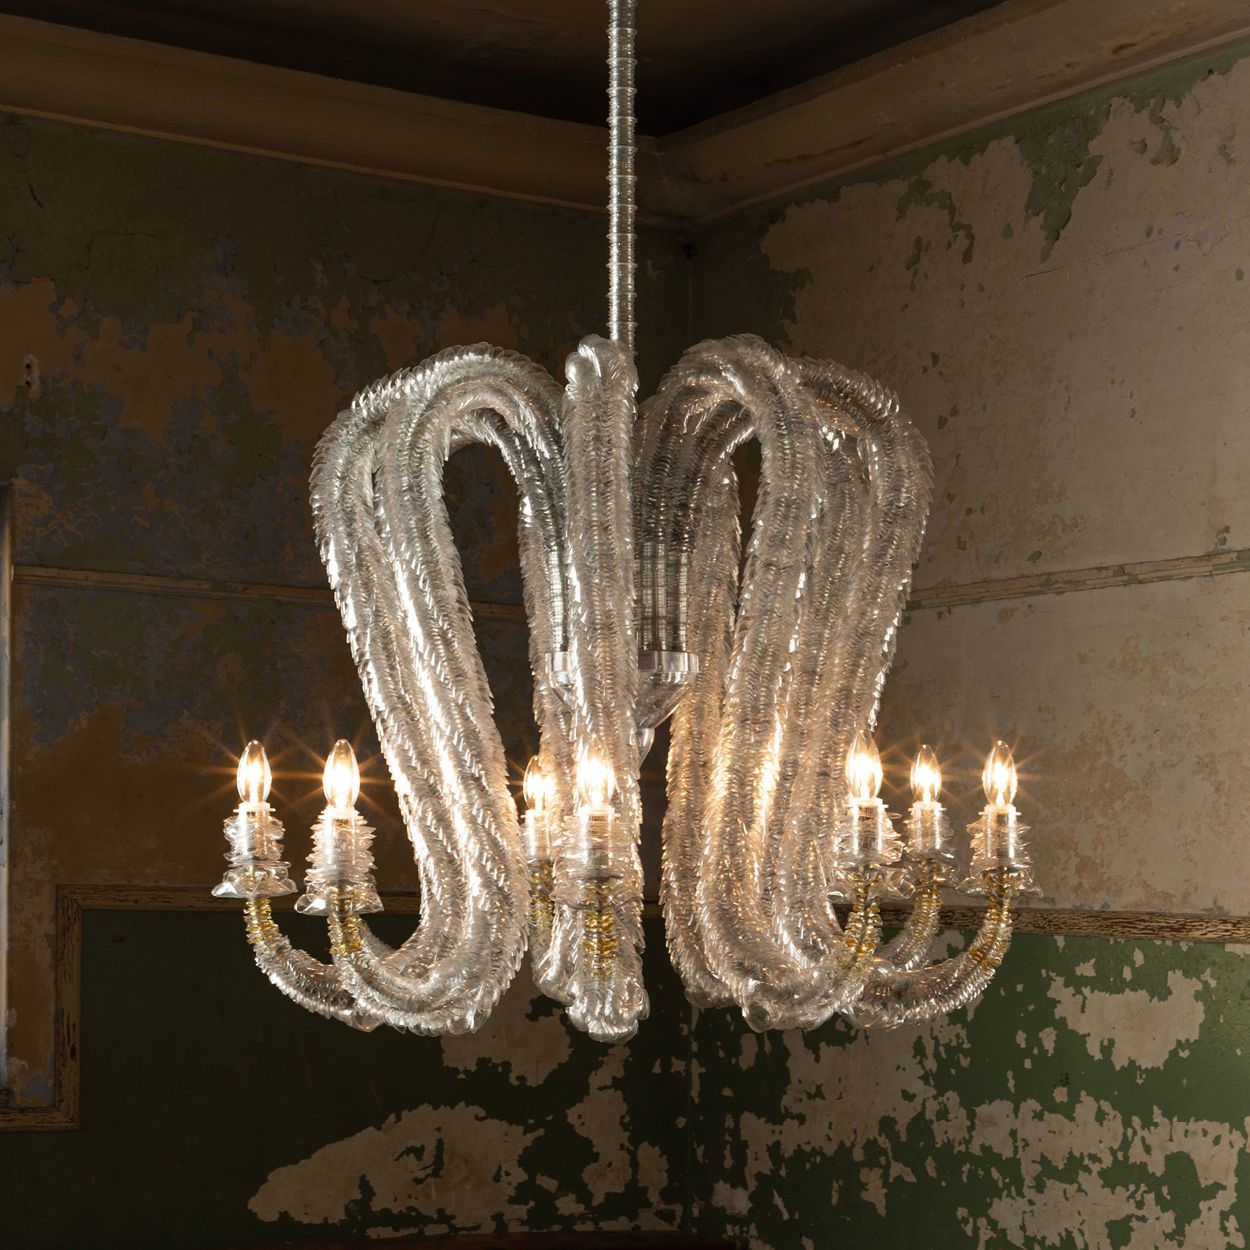 © Thierry Jeannot OCTOmut Chandelier courtesy ammann//gallery